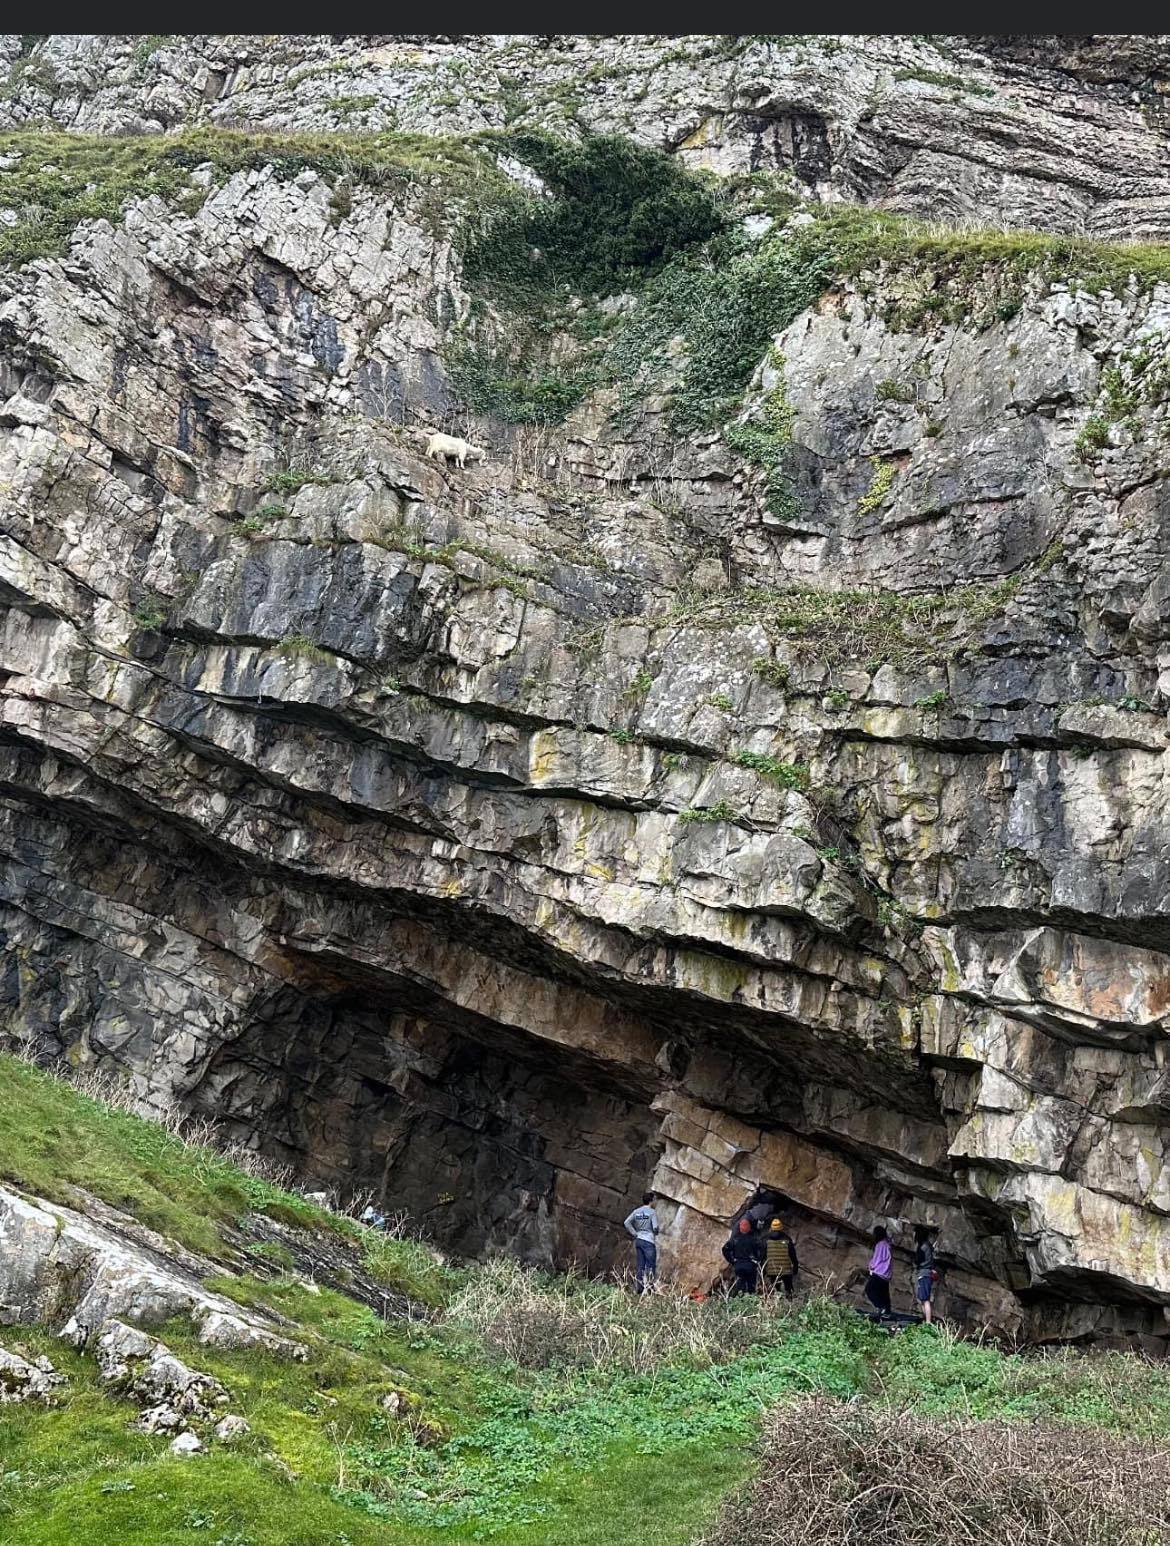 Numerous walkers on Llandudno’s Great Orme have reporteda stranded goat to Conwy County Council and the RSPCA, fearing the animal is stuck on the ledge near Elephant’s Cave..